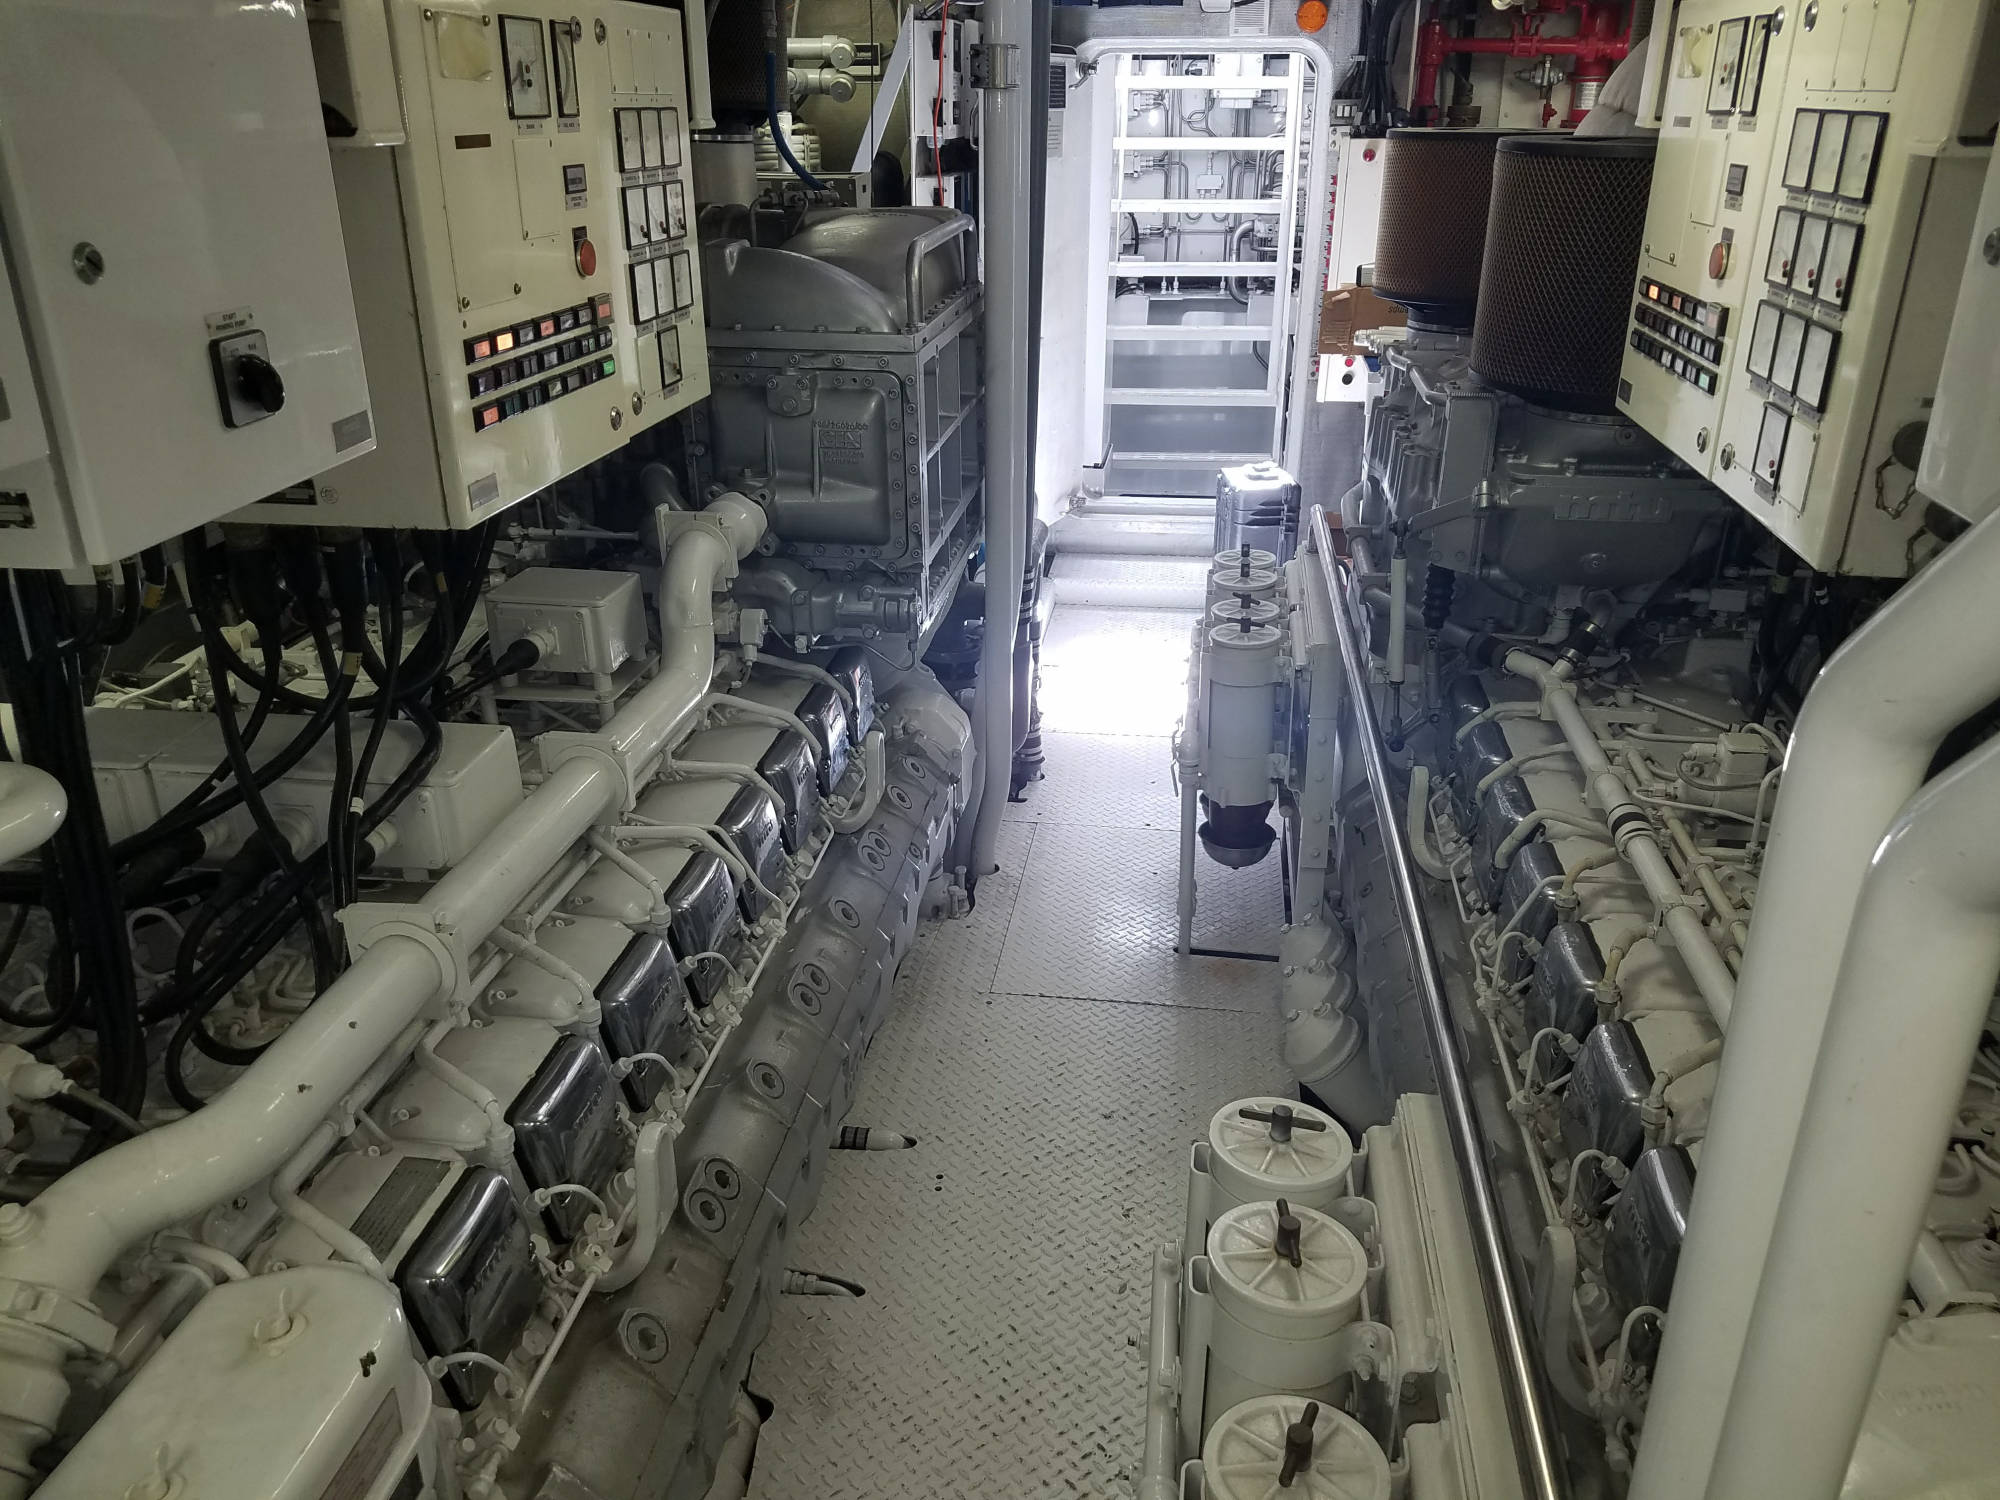 View of a marine engine room looking out